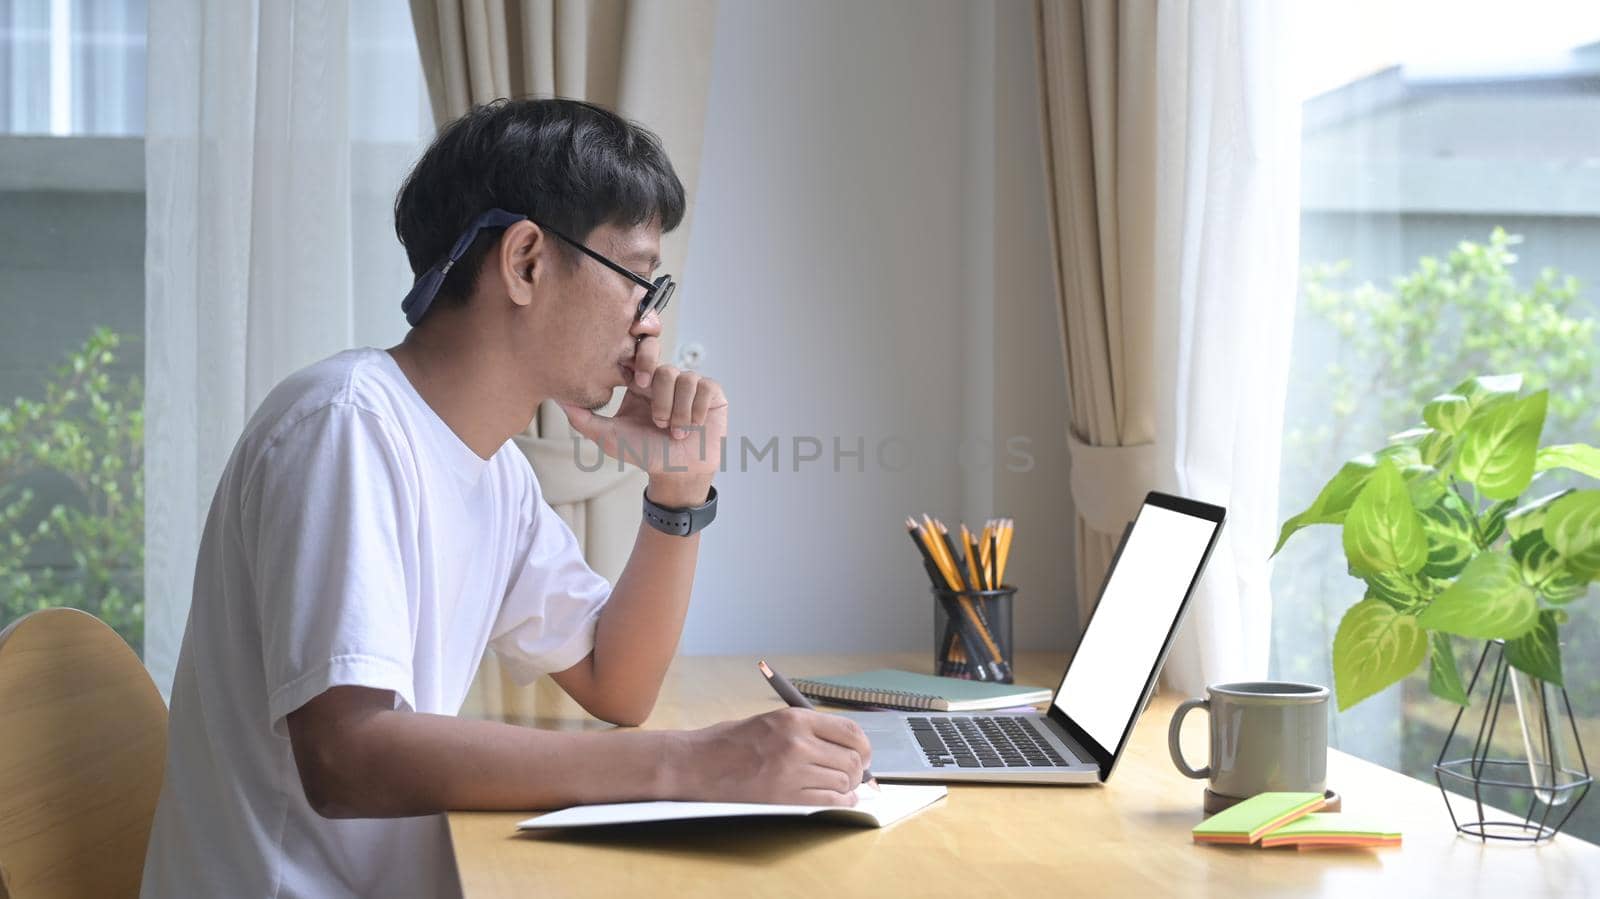 Focused asian man using laptop, reading email, working online at home office.